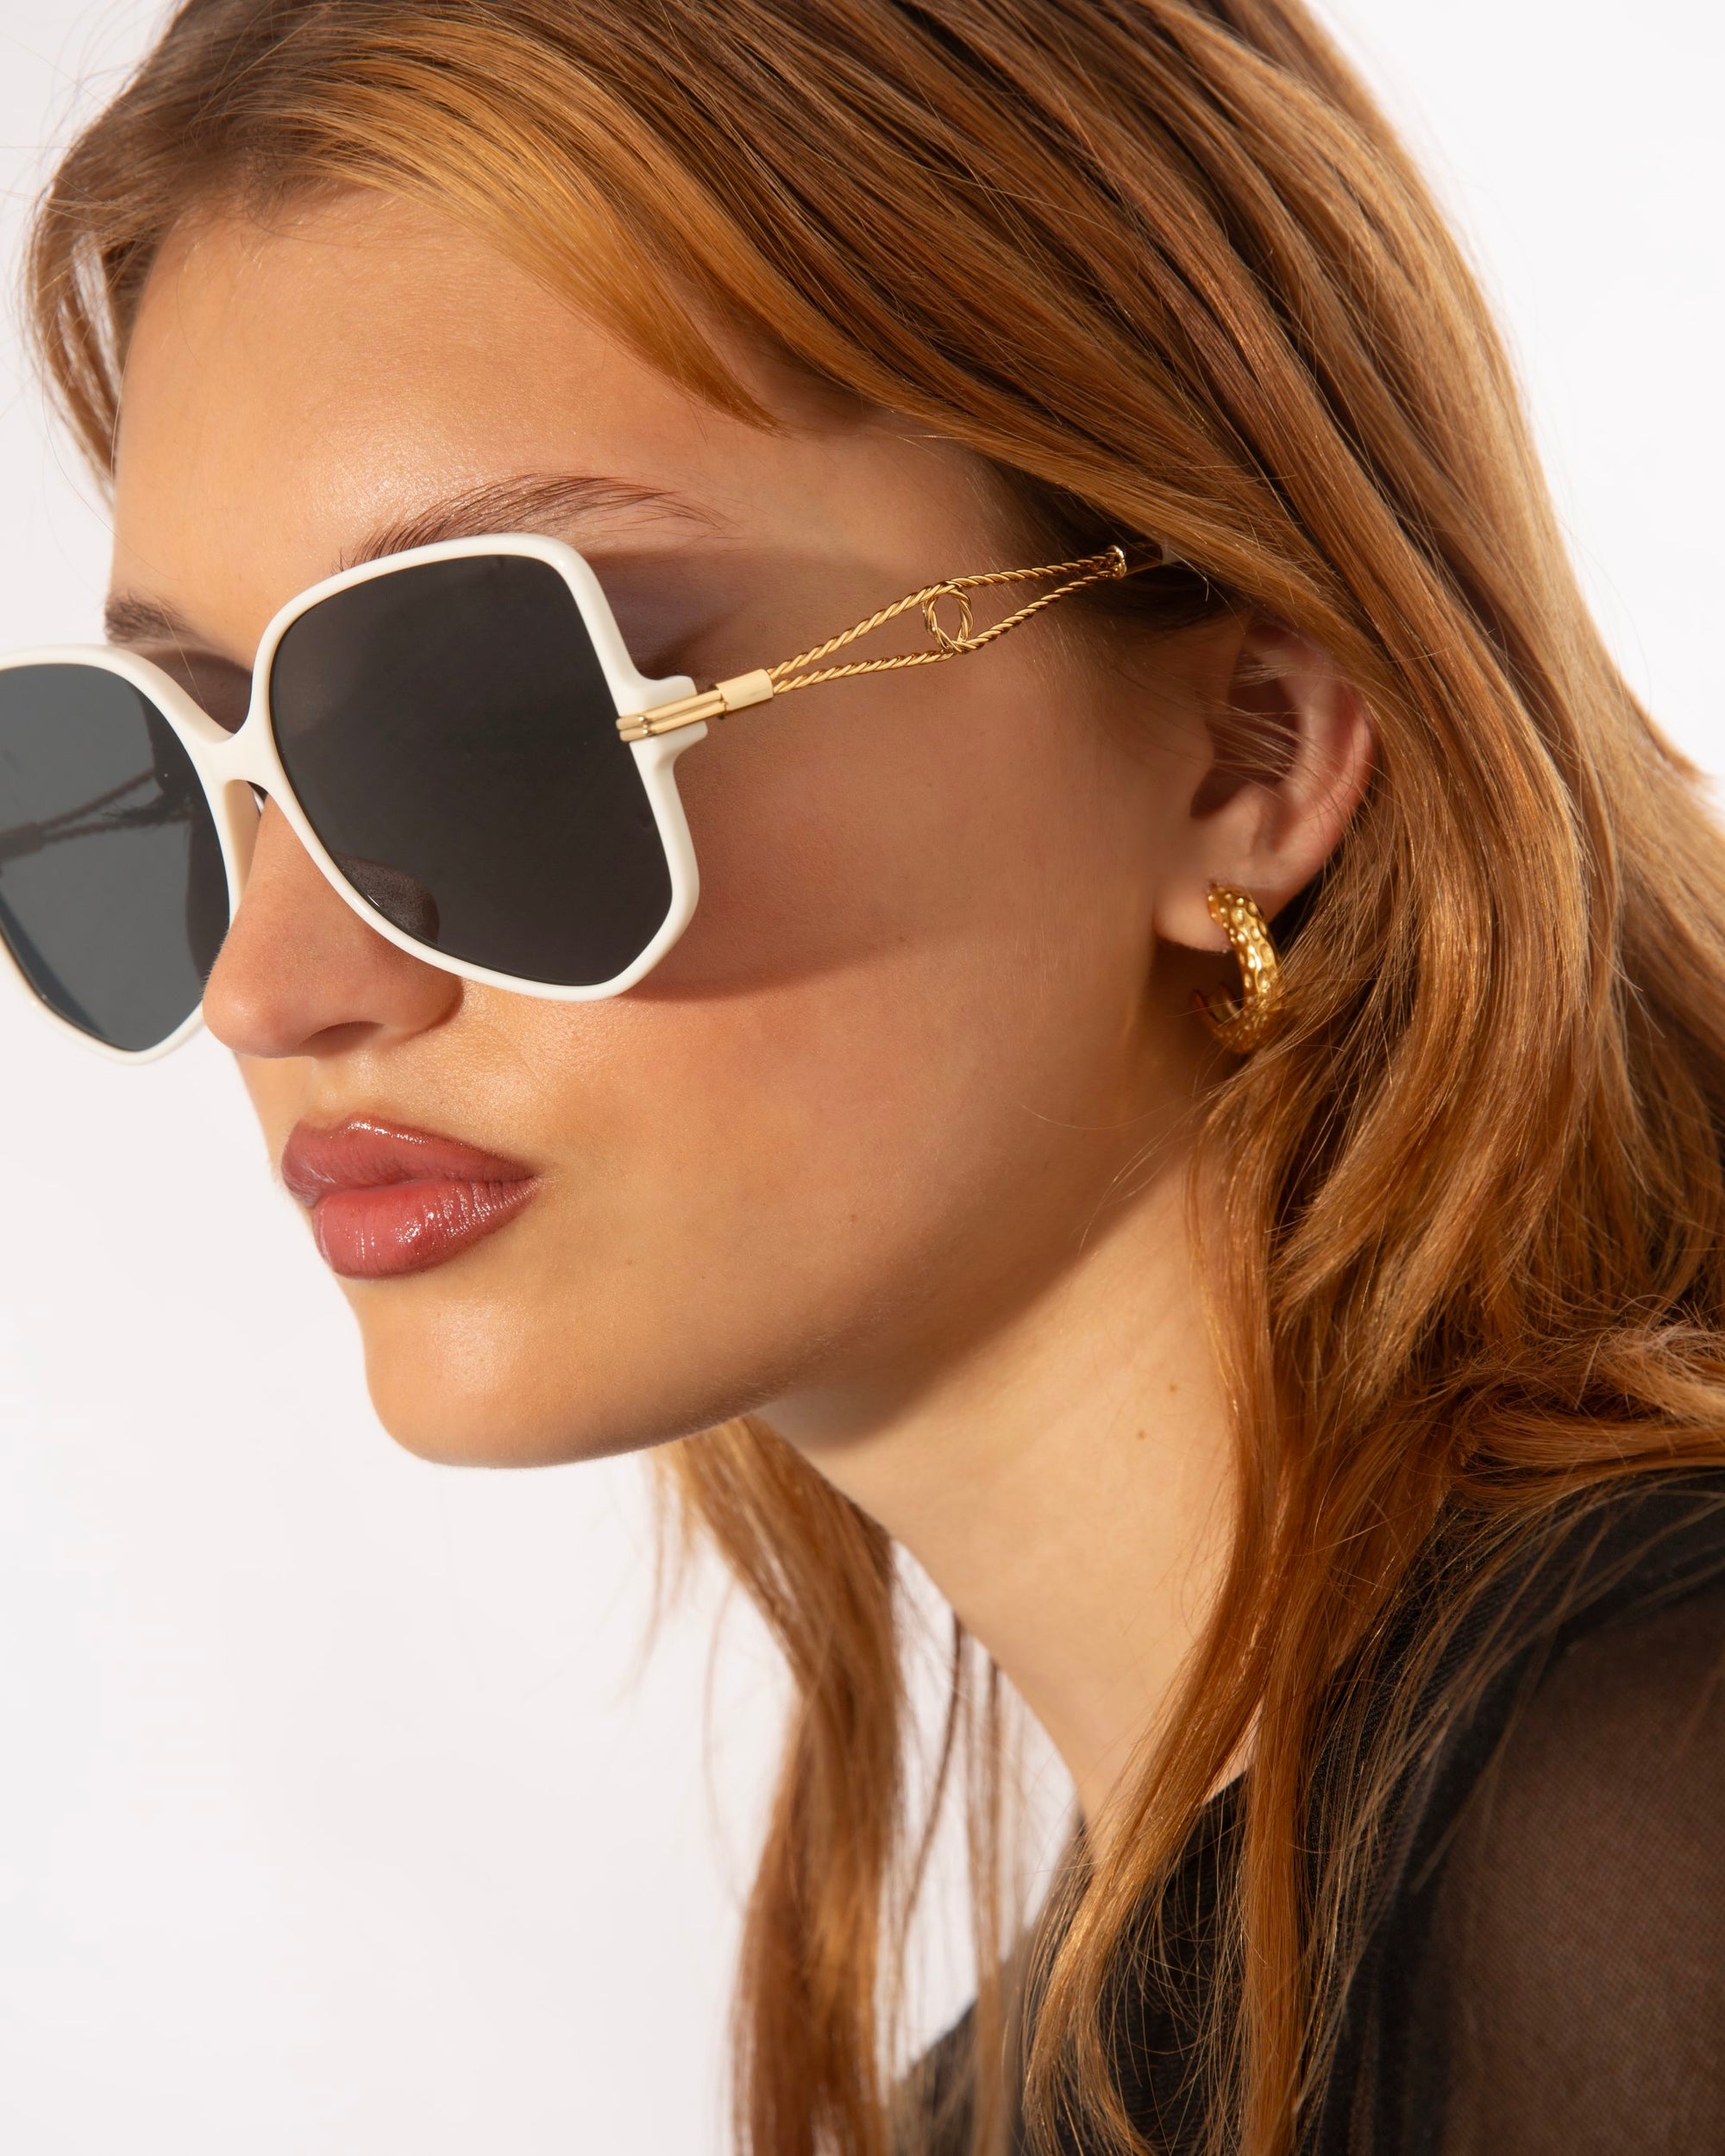 A person with long, auburn hair wearing square, oversized For Art&#39;s Sake® Voyager sunglasses with black lenses and 18-karat gold-plated chains is shown in a close-up profile view. They have light skin and are also wearing gold hoop earrings. The background is plain and white.